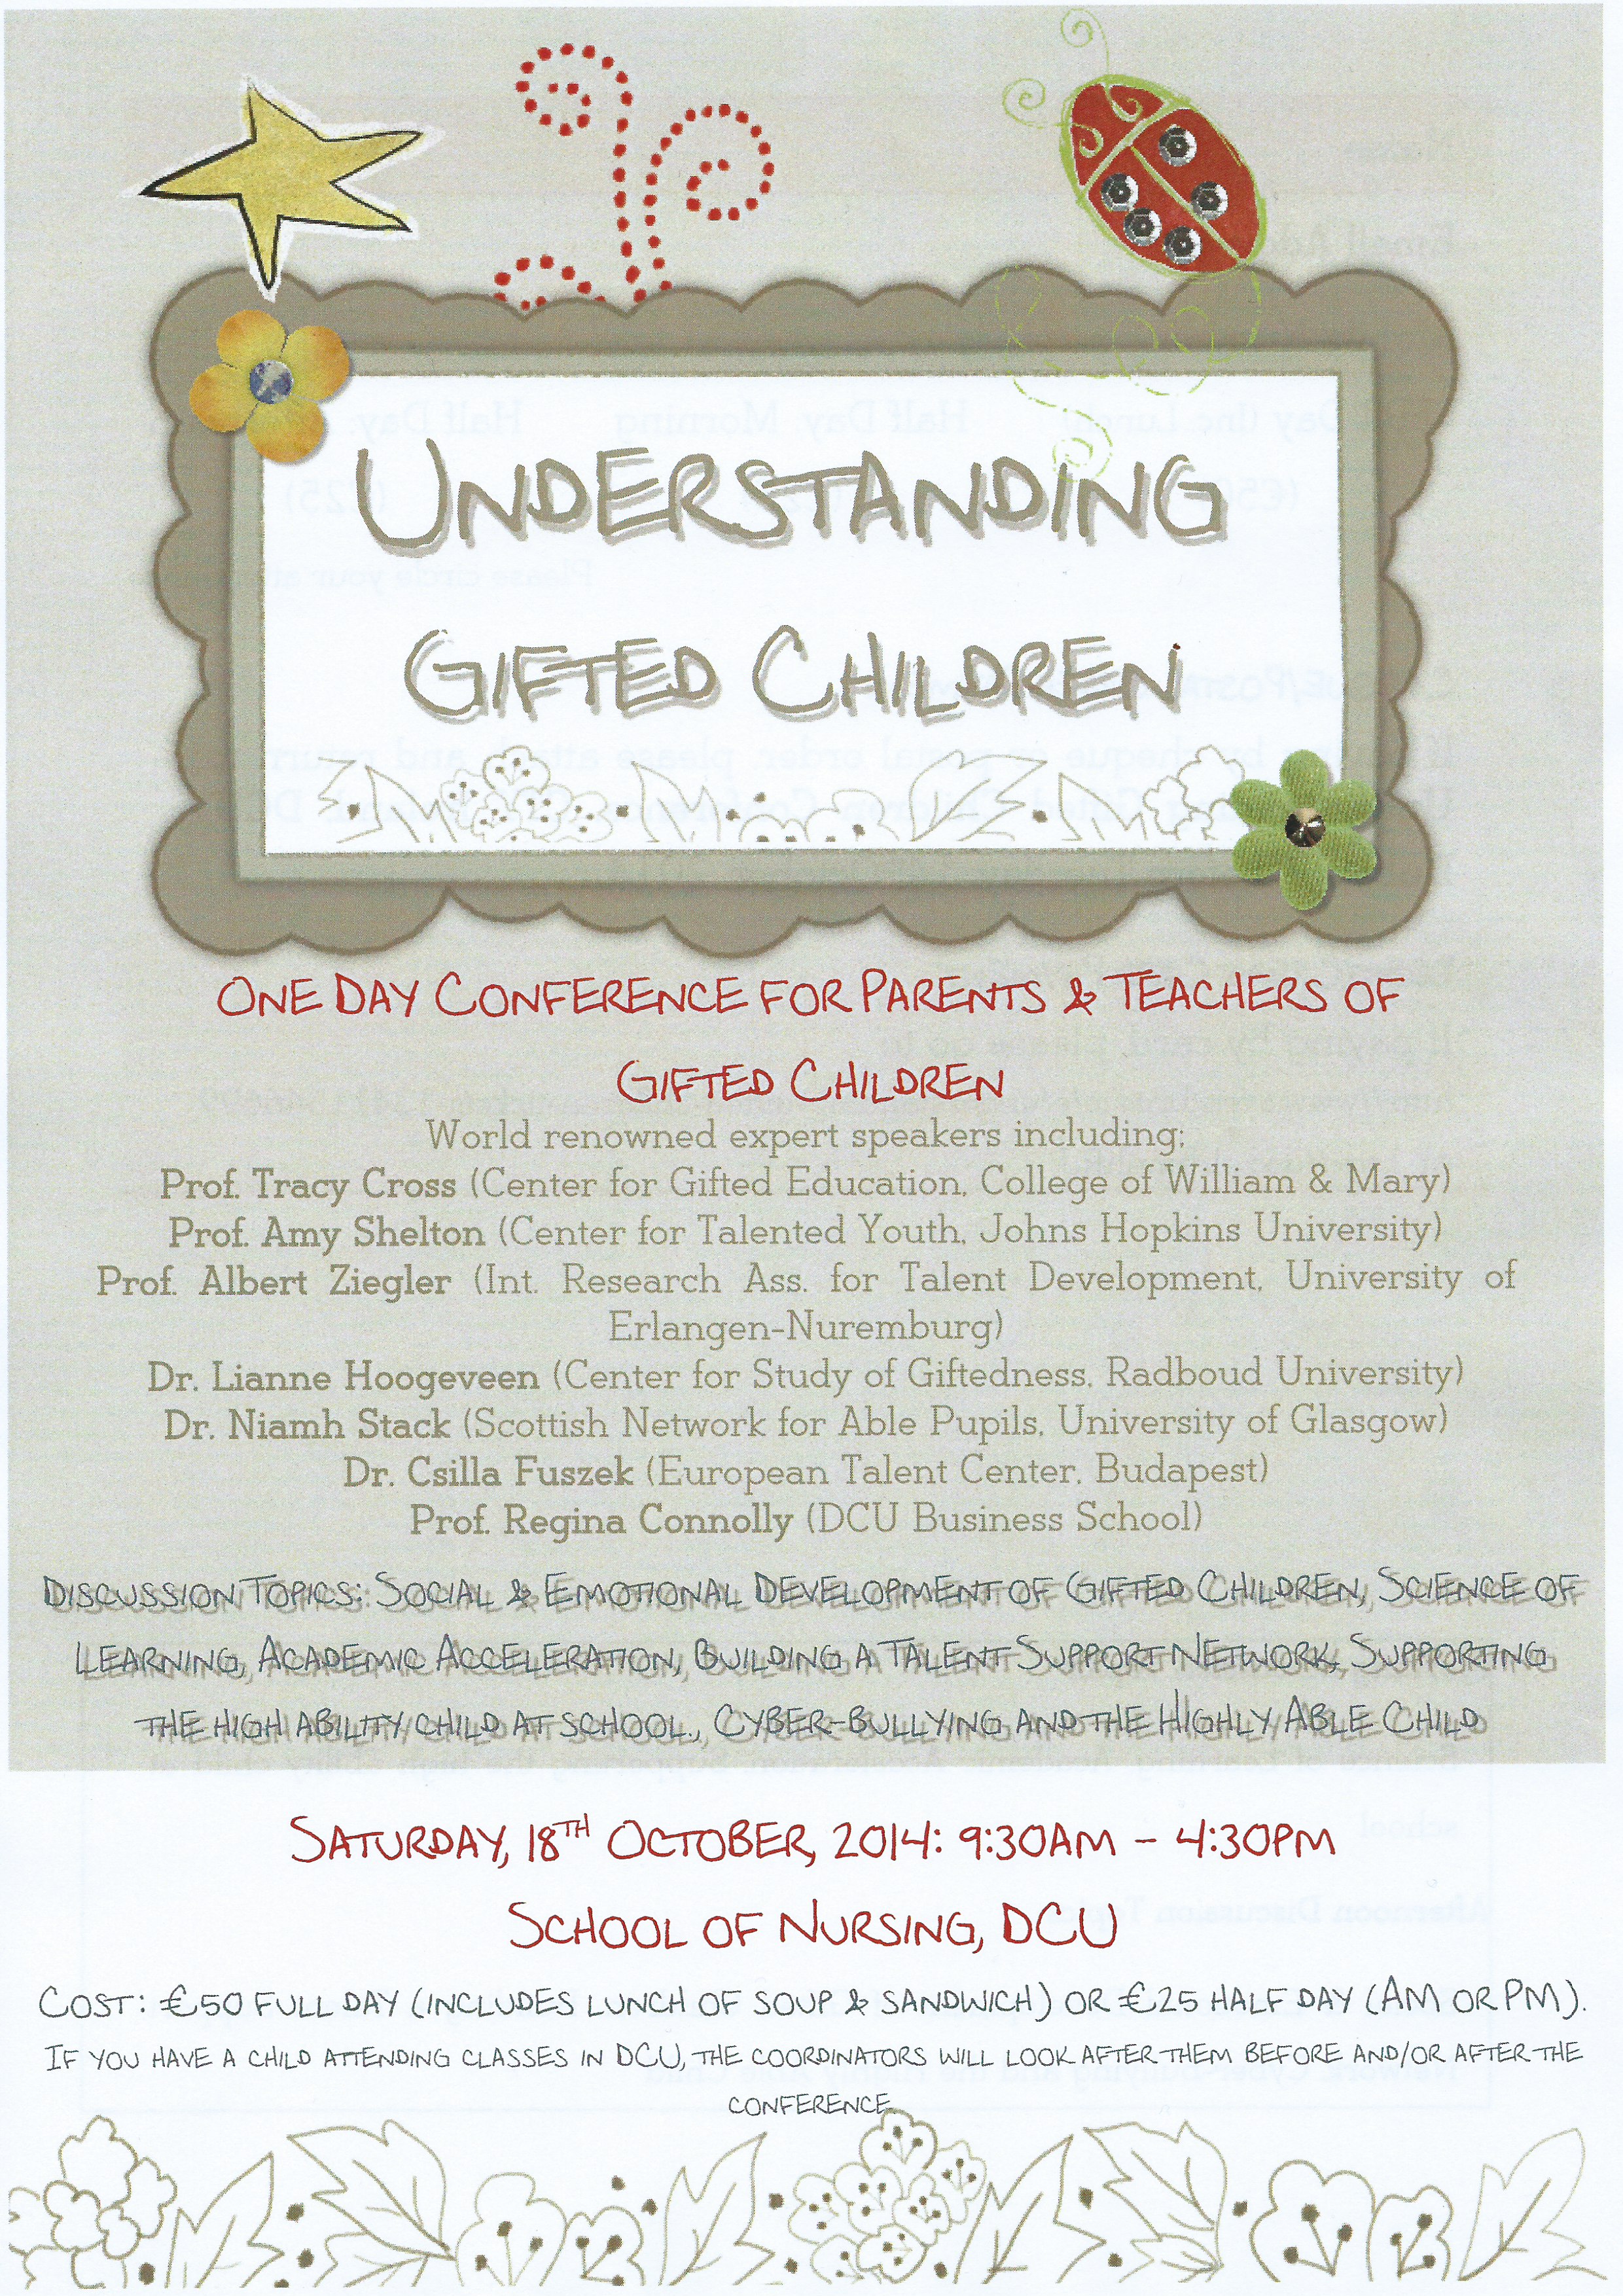 Guiding Gifted Children conference CTYI